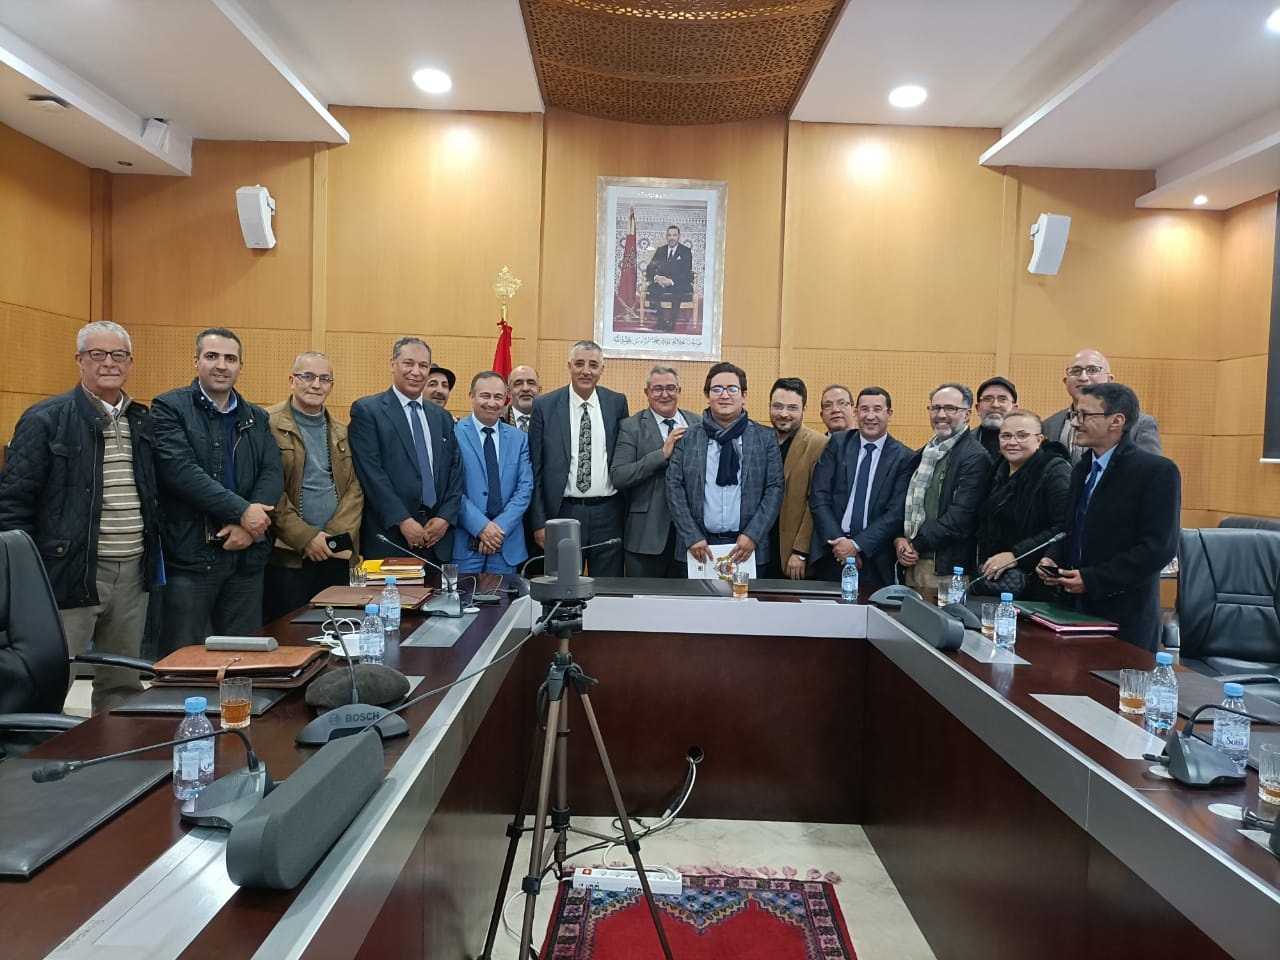 Details of the meeting of the National University of Higher Education Staff with the Secretary General of the Ministry of Higher Education